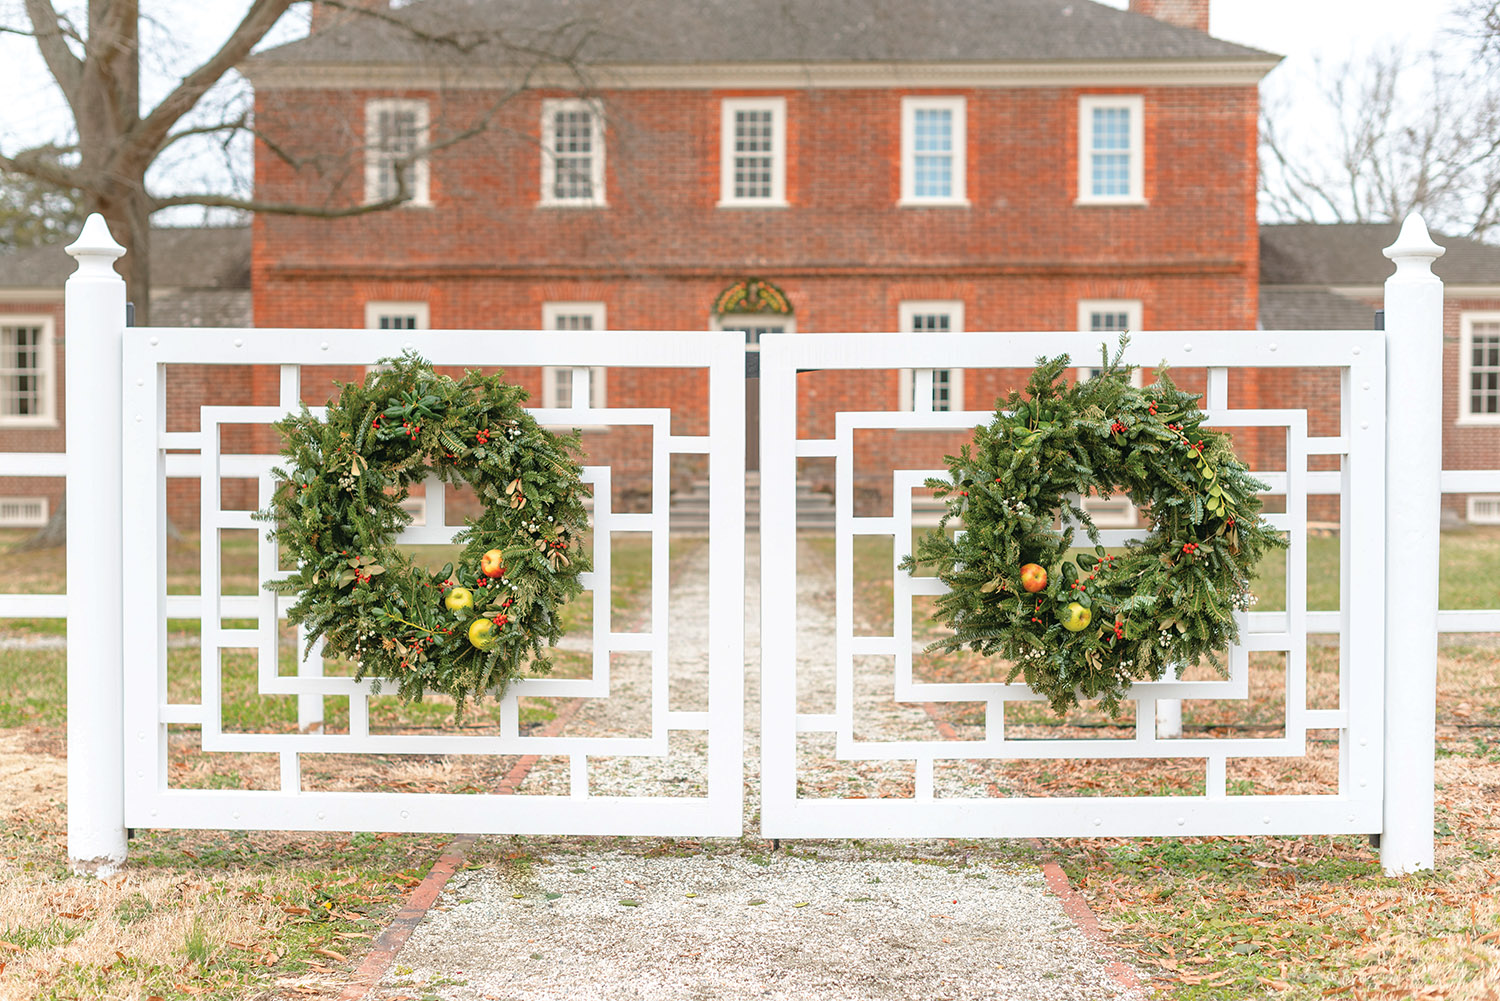 Holiday wreaths on gate at the entrance to Brooke's Bank historic home.